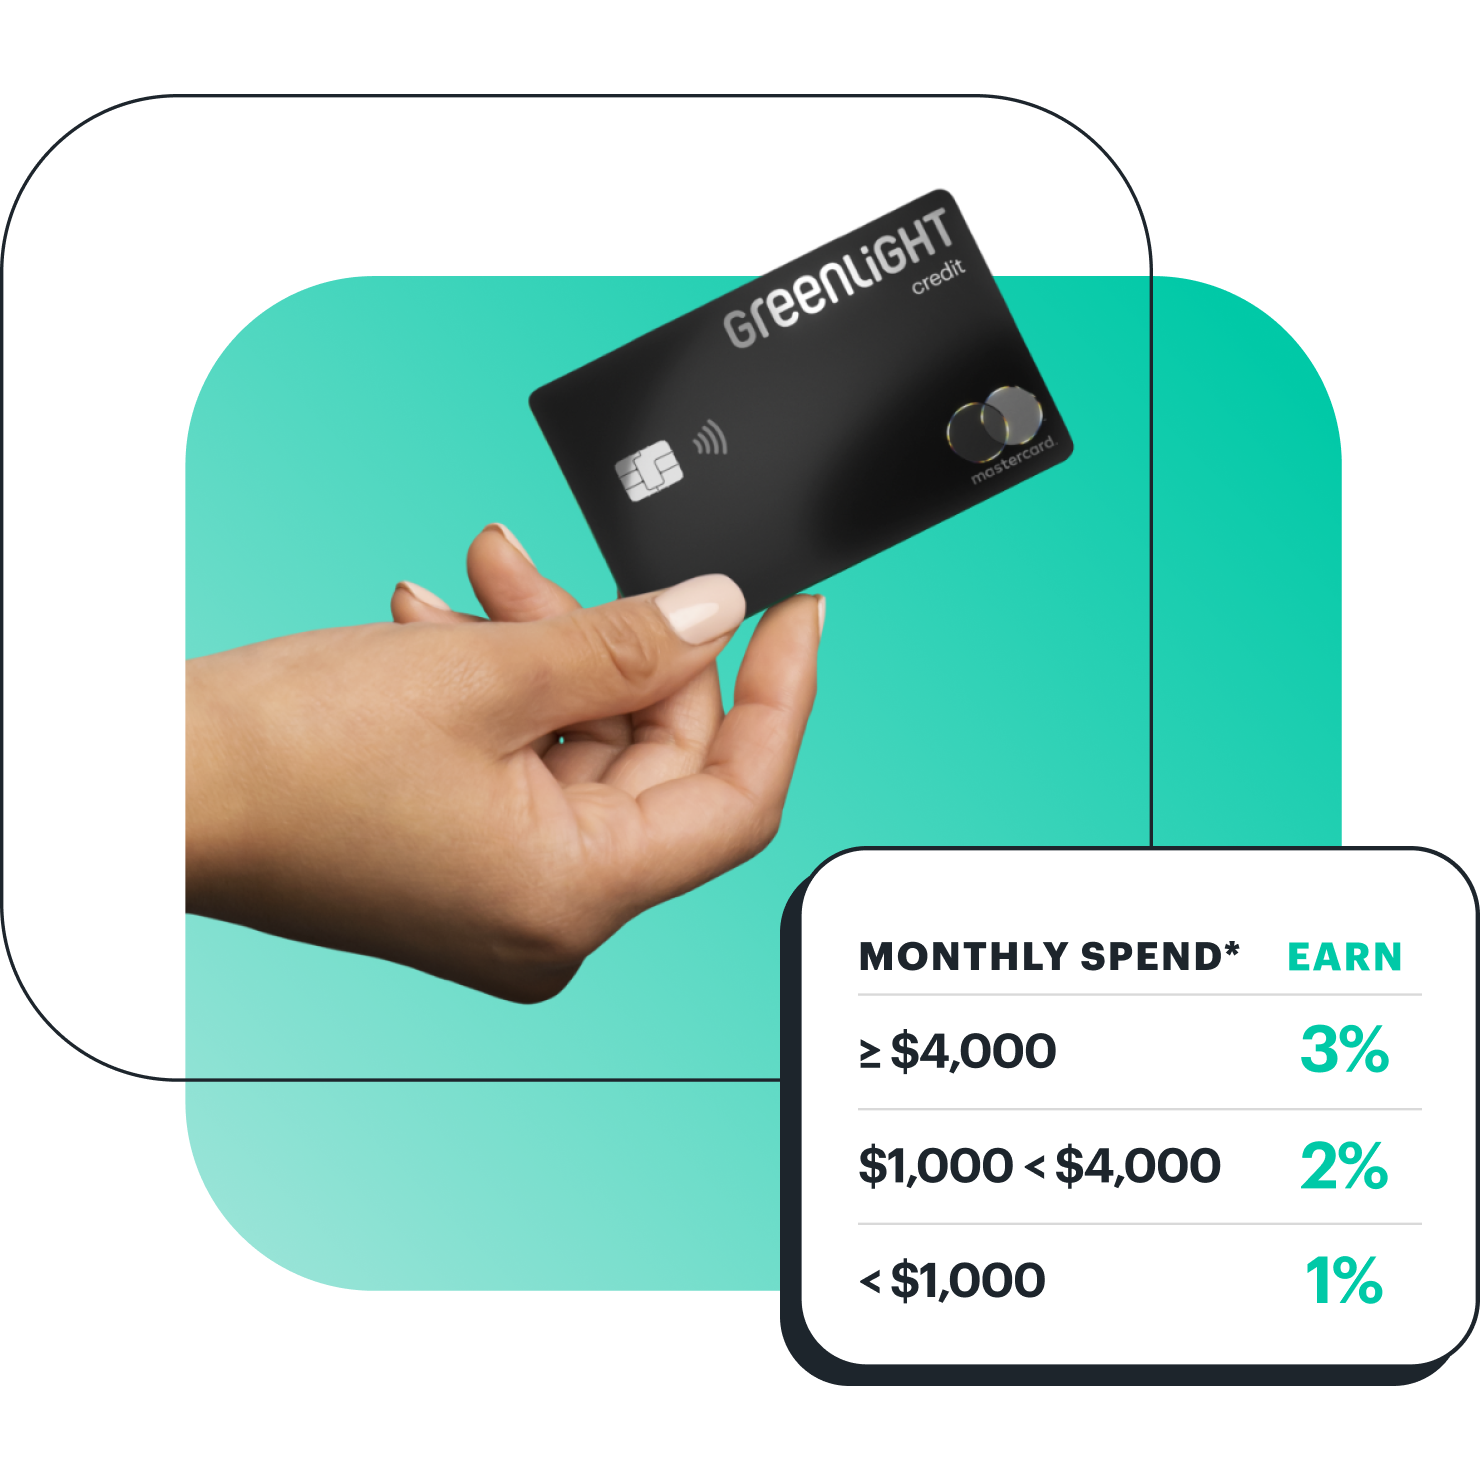 Hand holds Greenlight Family Cash Card, a parent credit card with up to 3% cash back on each spend